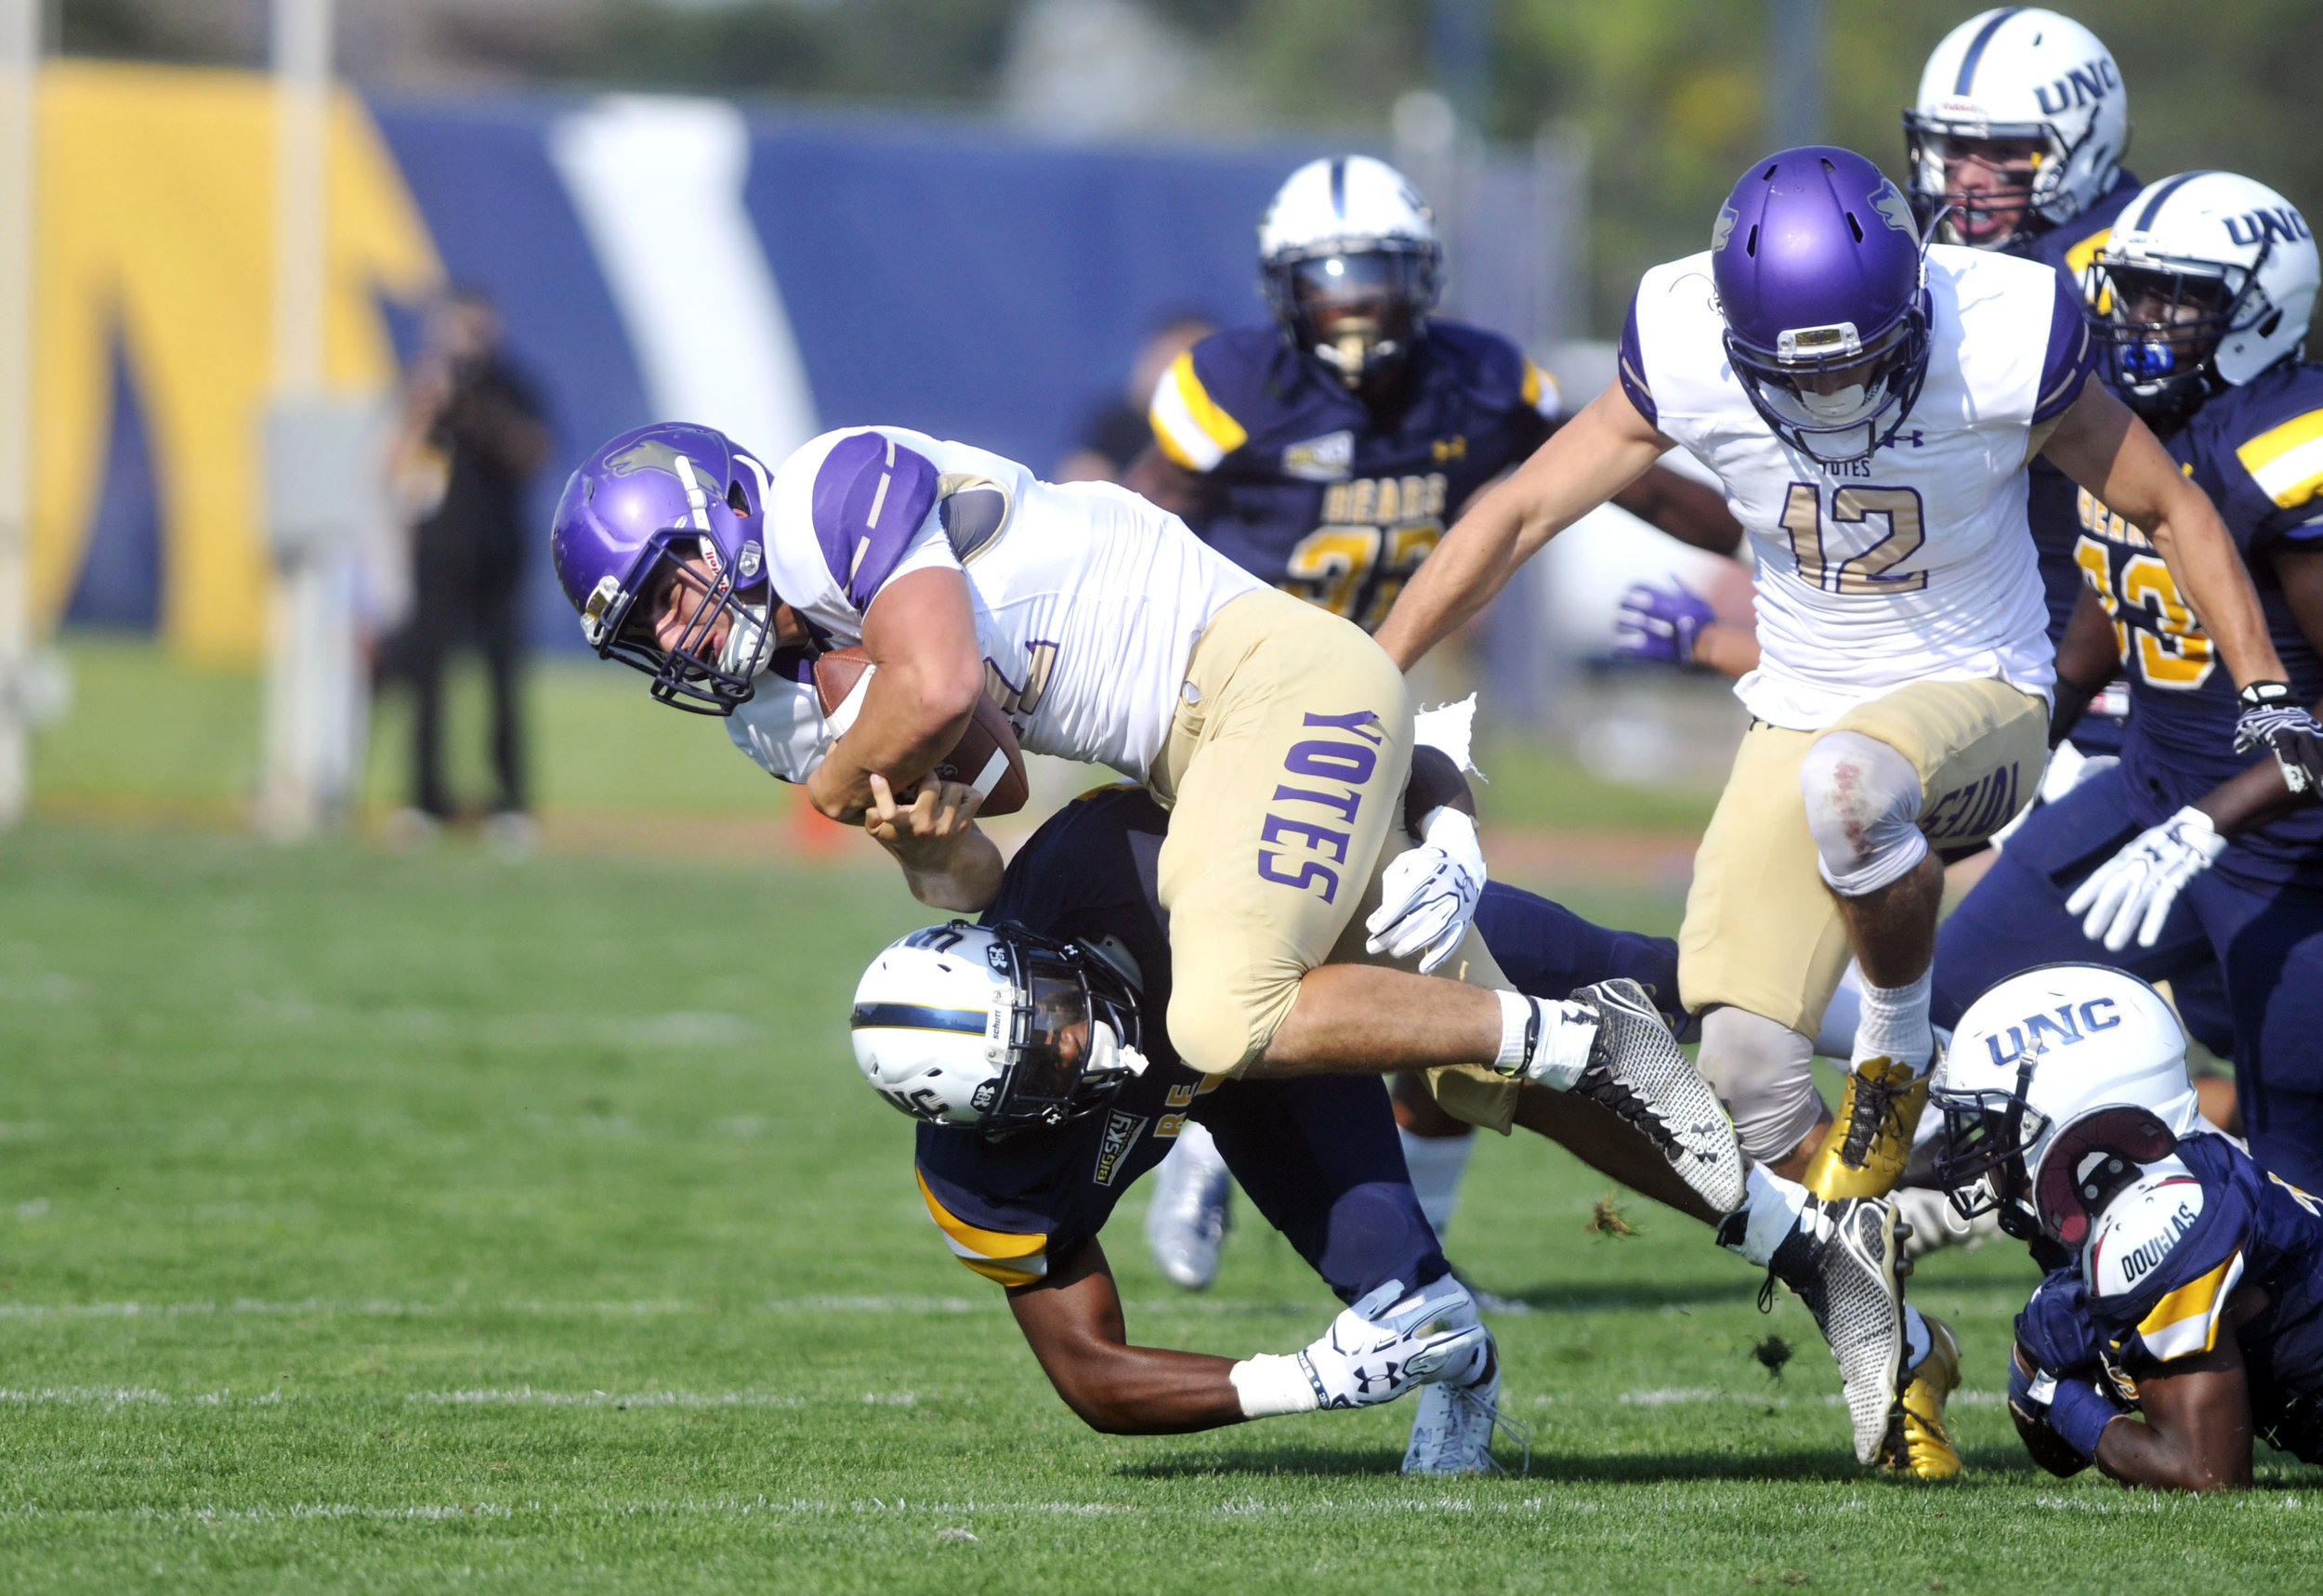  College of Idaho's&nbsp; Nick Calzaretta gets tackled by University of Northern Colorado's Michael Walker on during a football game at Nottingham Field in Greeley, September 2017. 